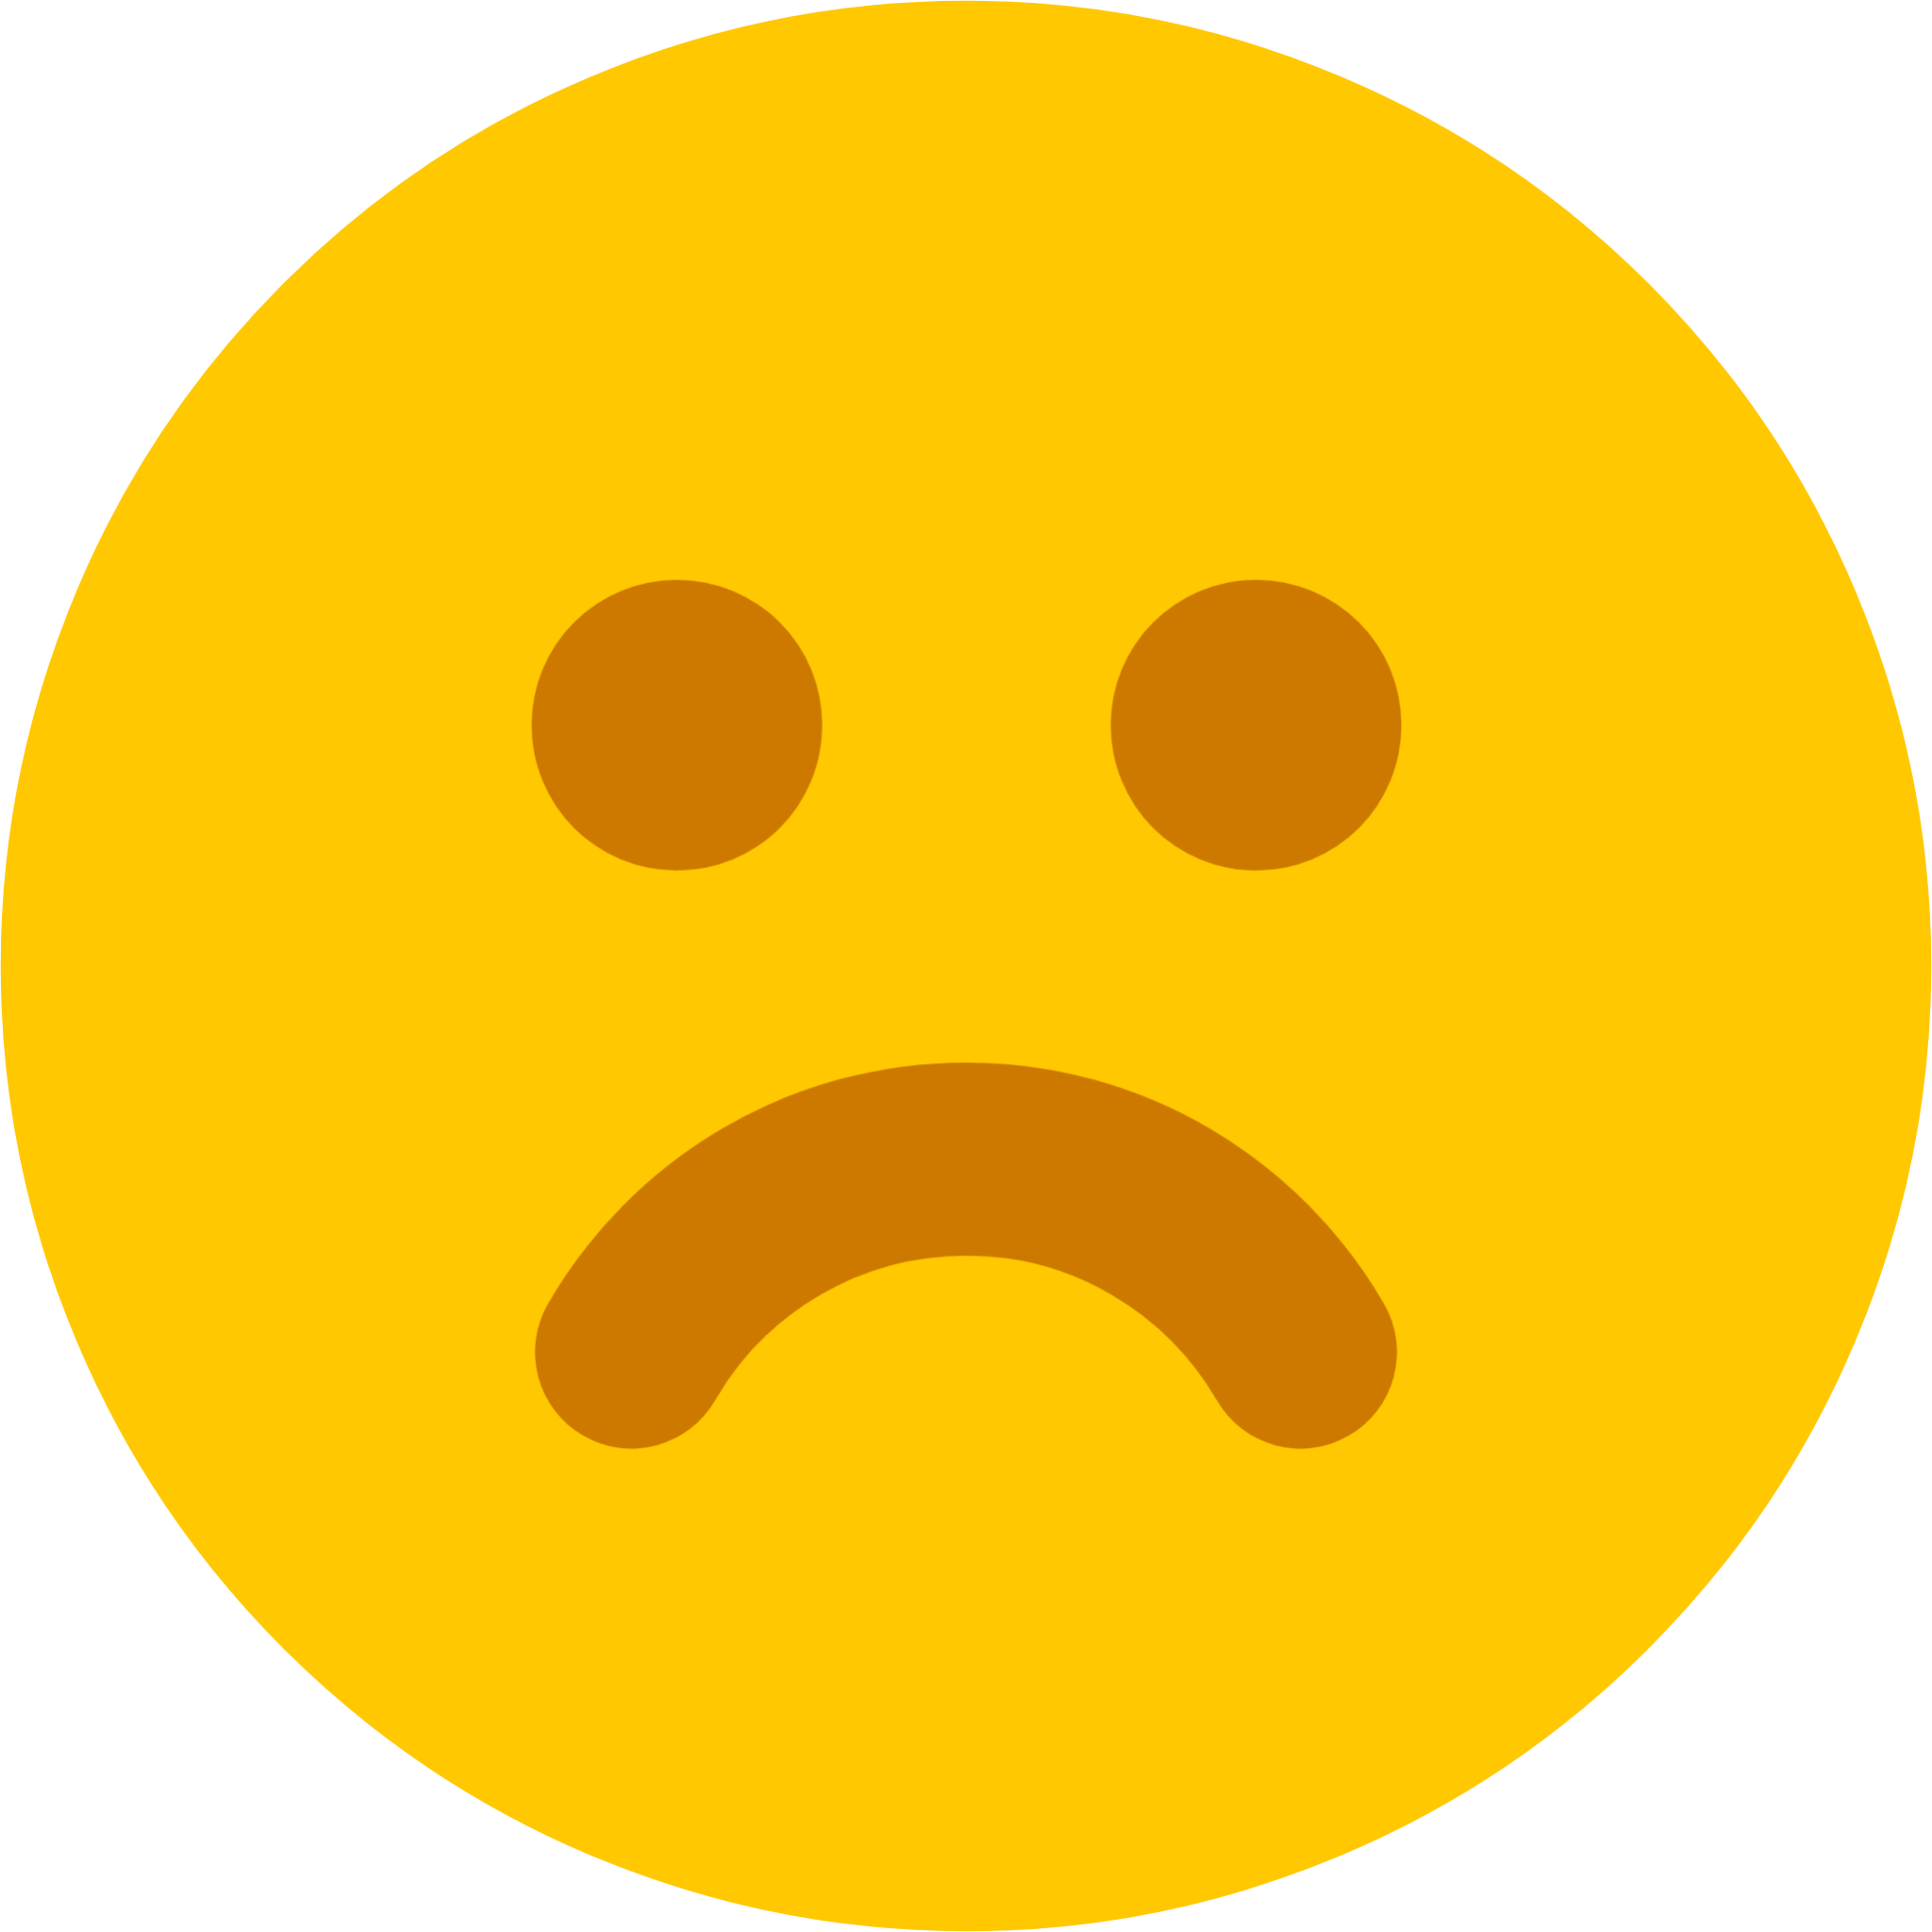 frowning face icon